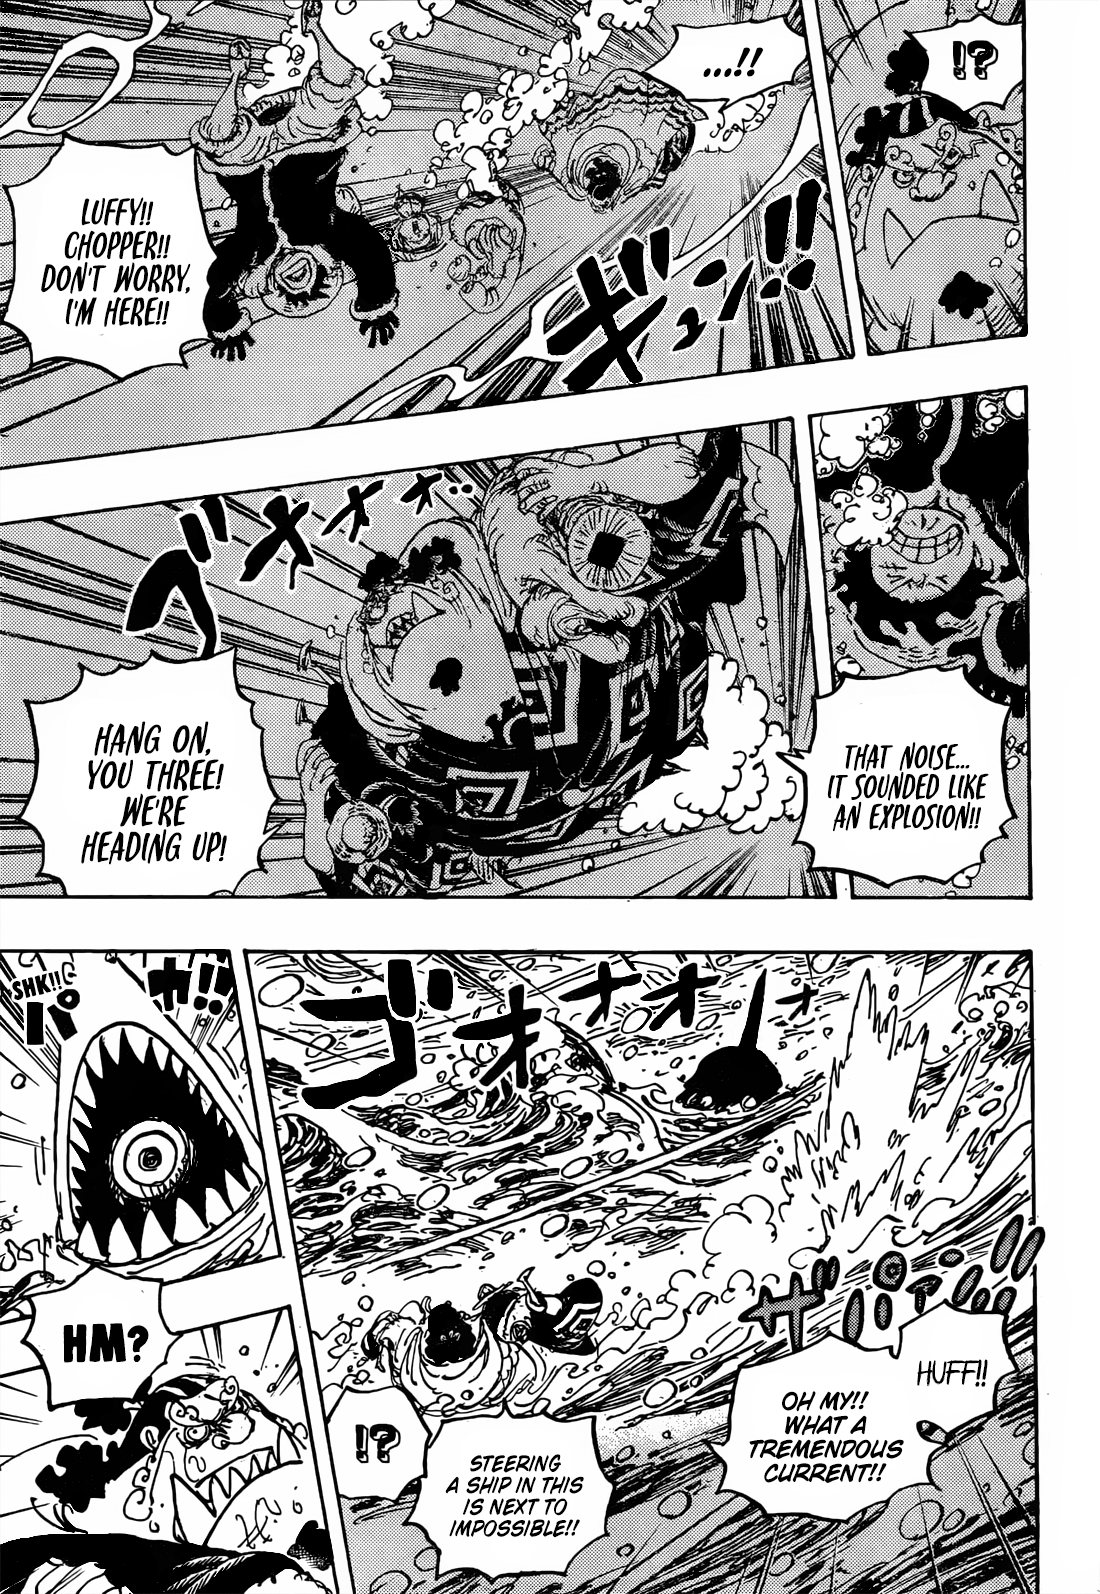 One piece chapter 1061 spoiler english!